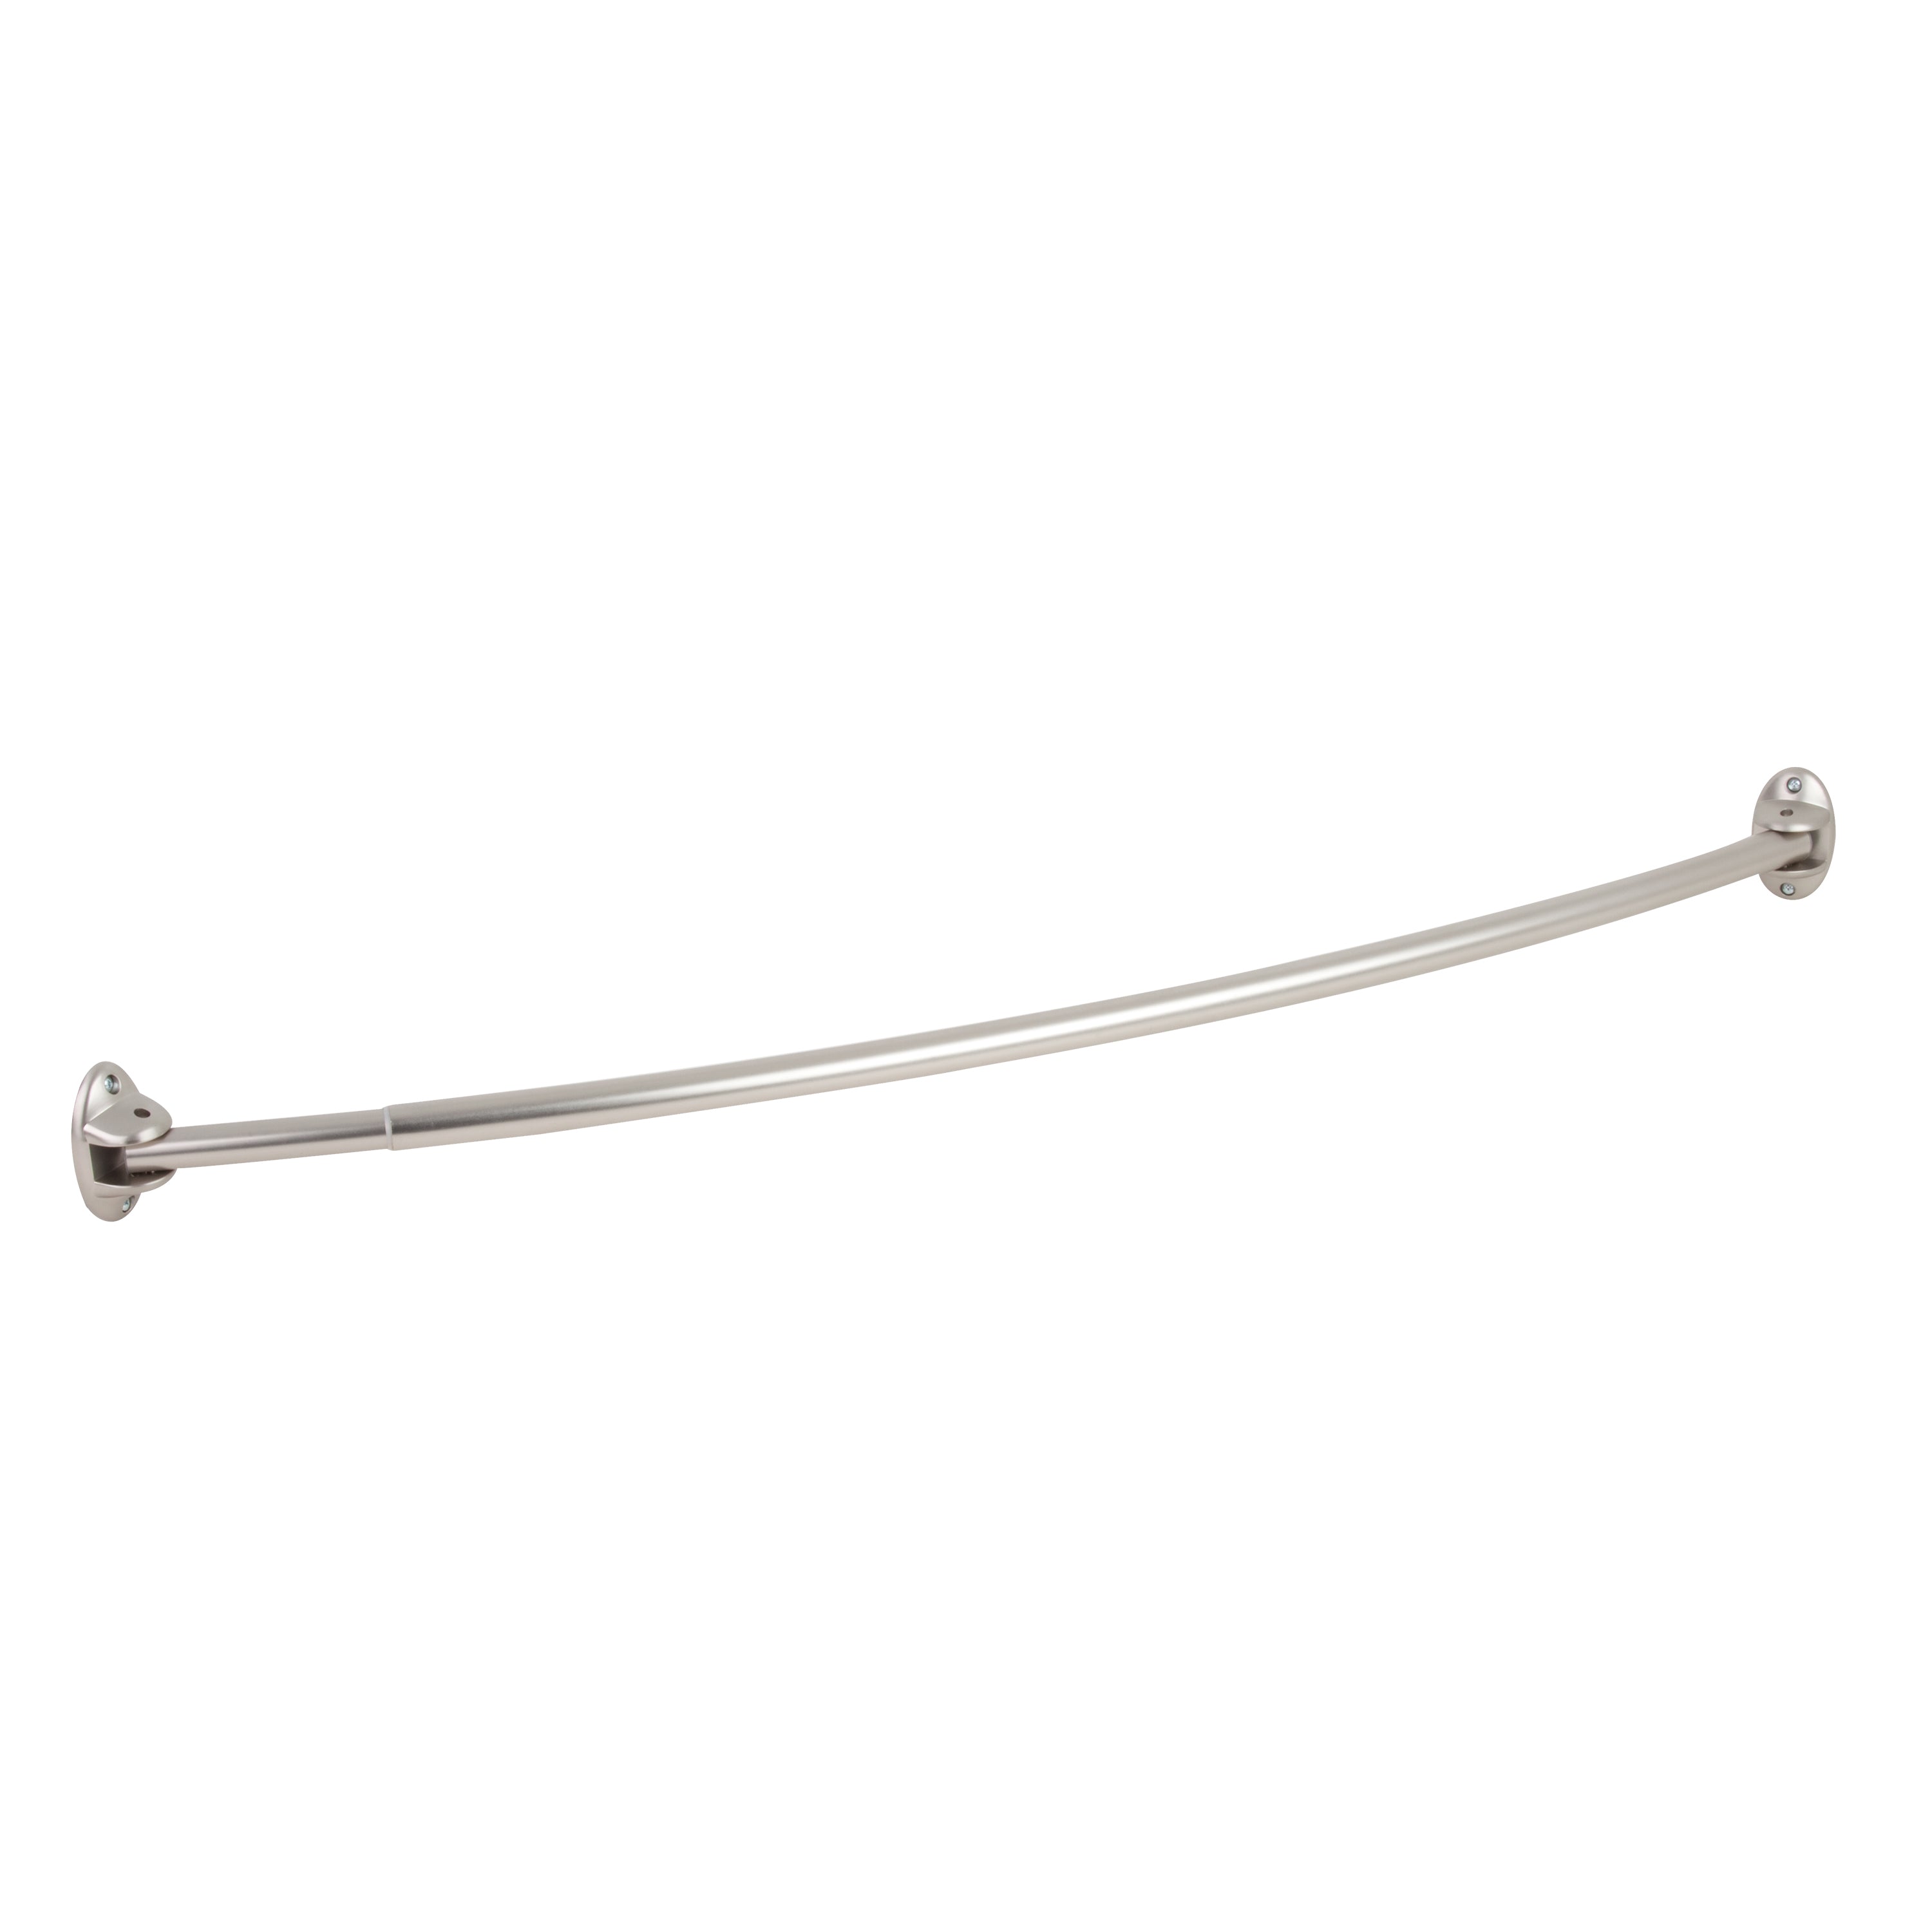 Honey-Can-Do 72 Curved Shower Rod, Brushed Nickel